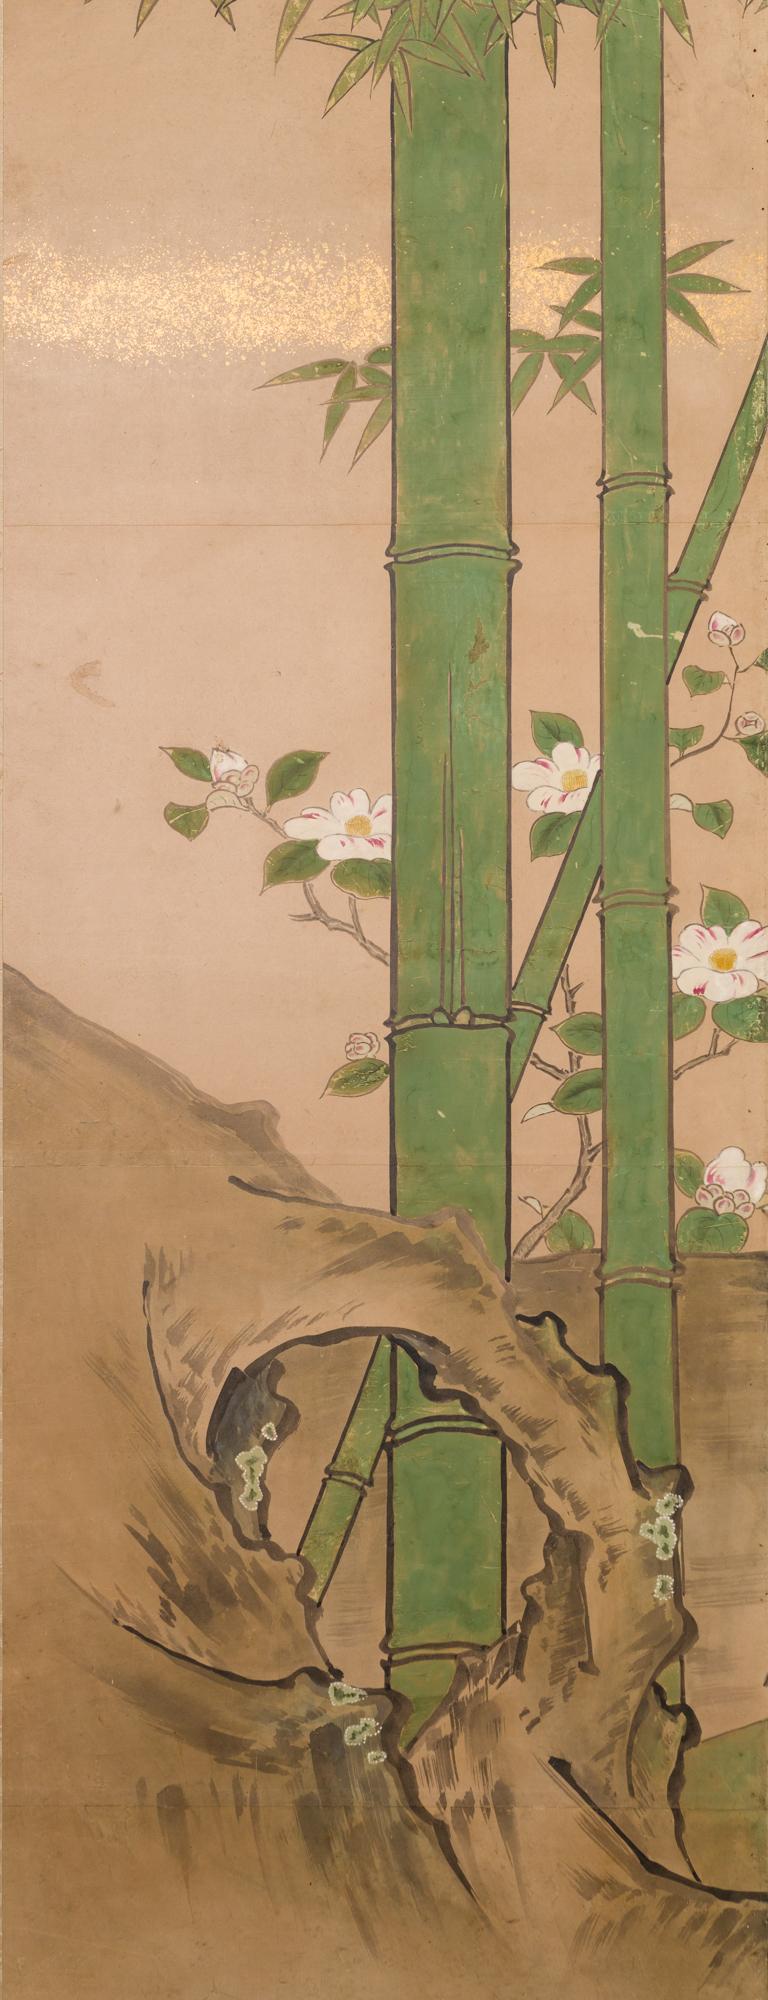 Meiji period painting (1868 - 1912) of a peaceful water landscape in Spring with plum, peony, camellia, and bamboo. Ducks swim in a pond while a pair of blue birds look on. Painted in mineral pigments on mulberry paper with gold dust clouds and a